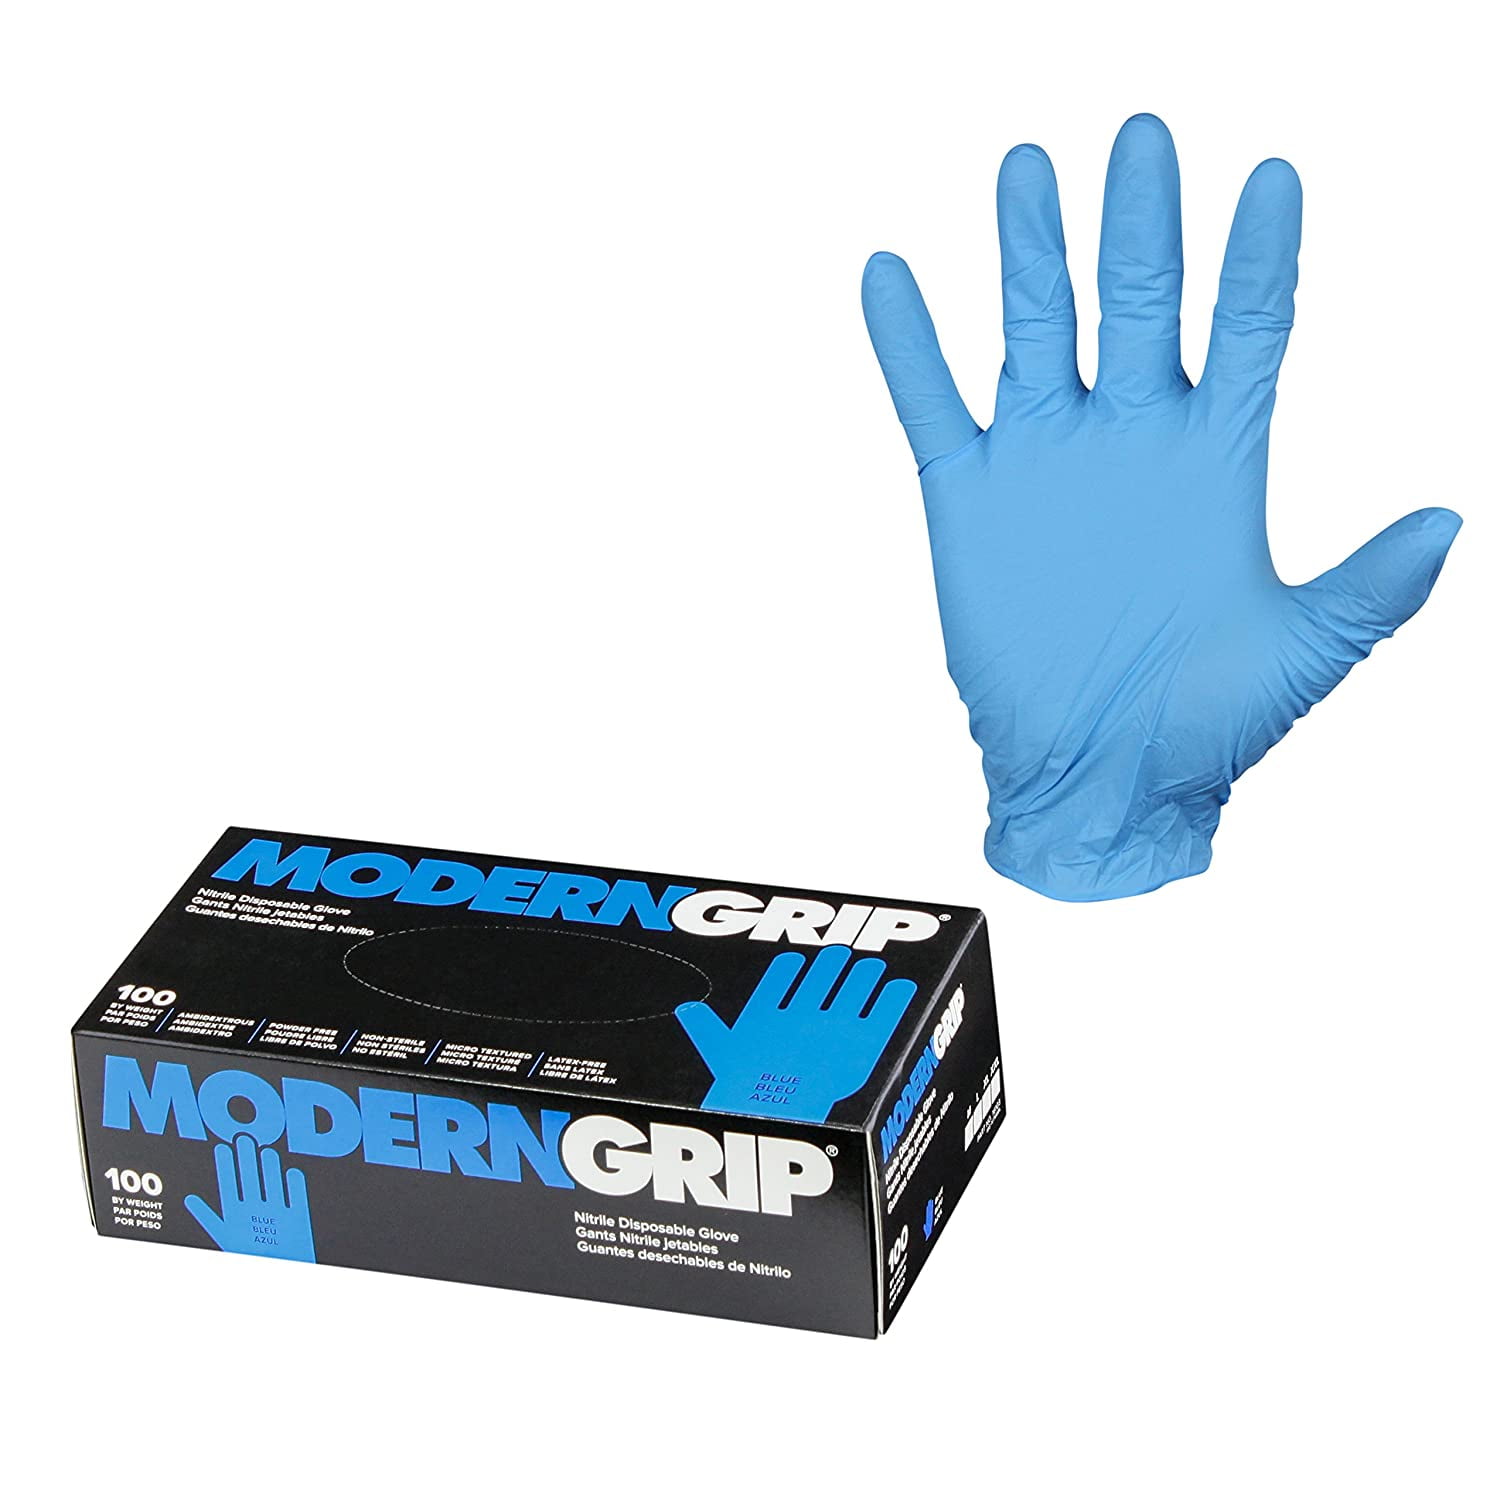 Firm Grip Painting Disposable Nitrile Gloves